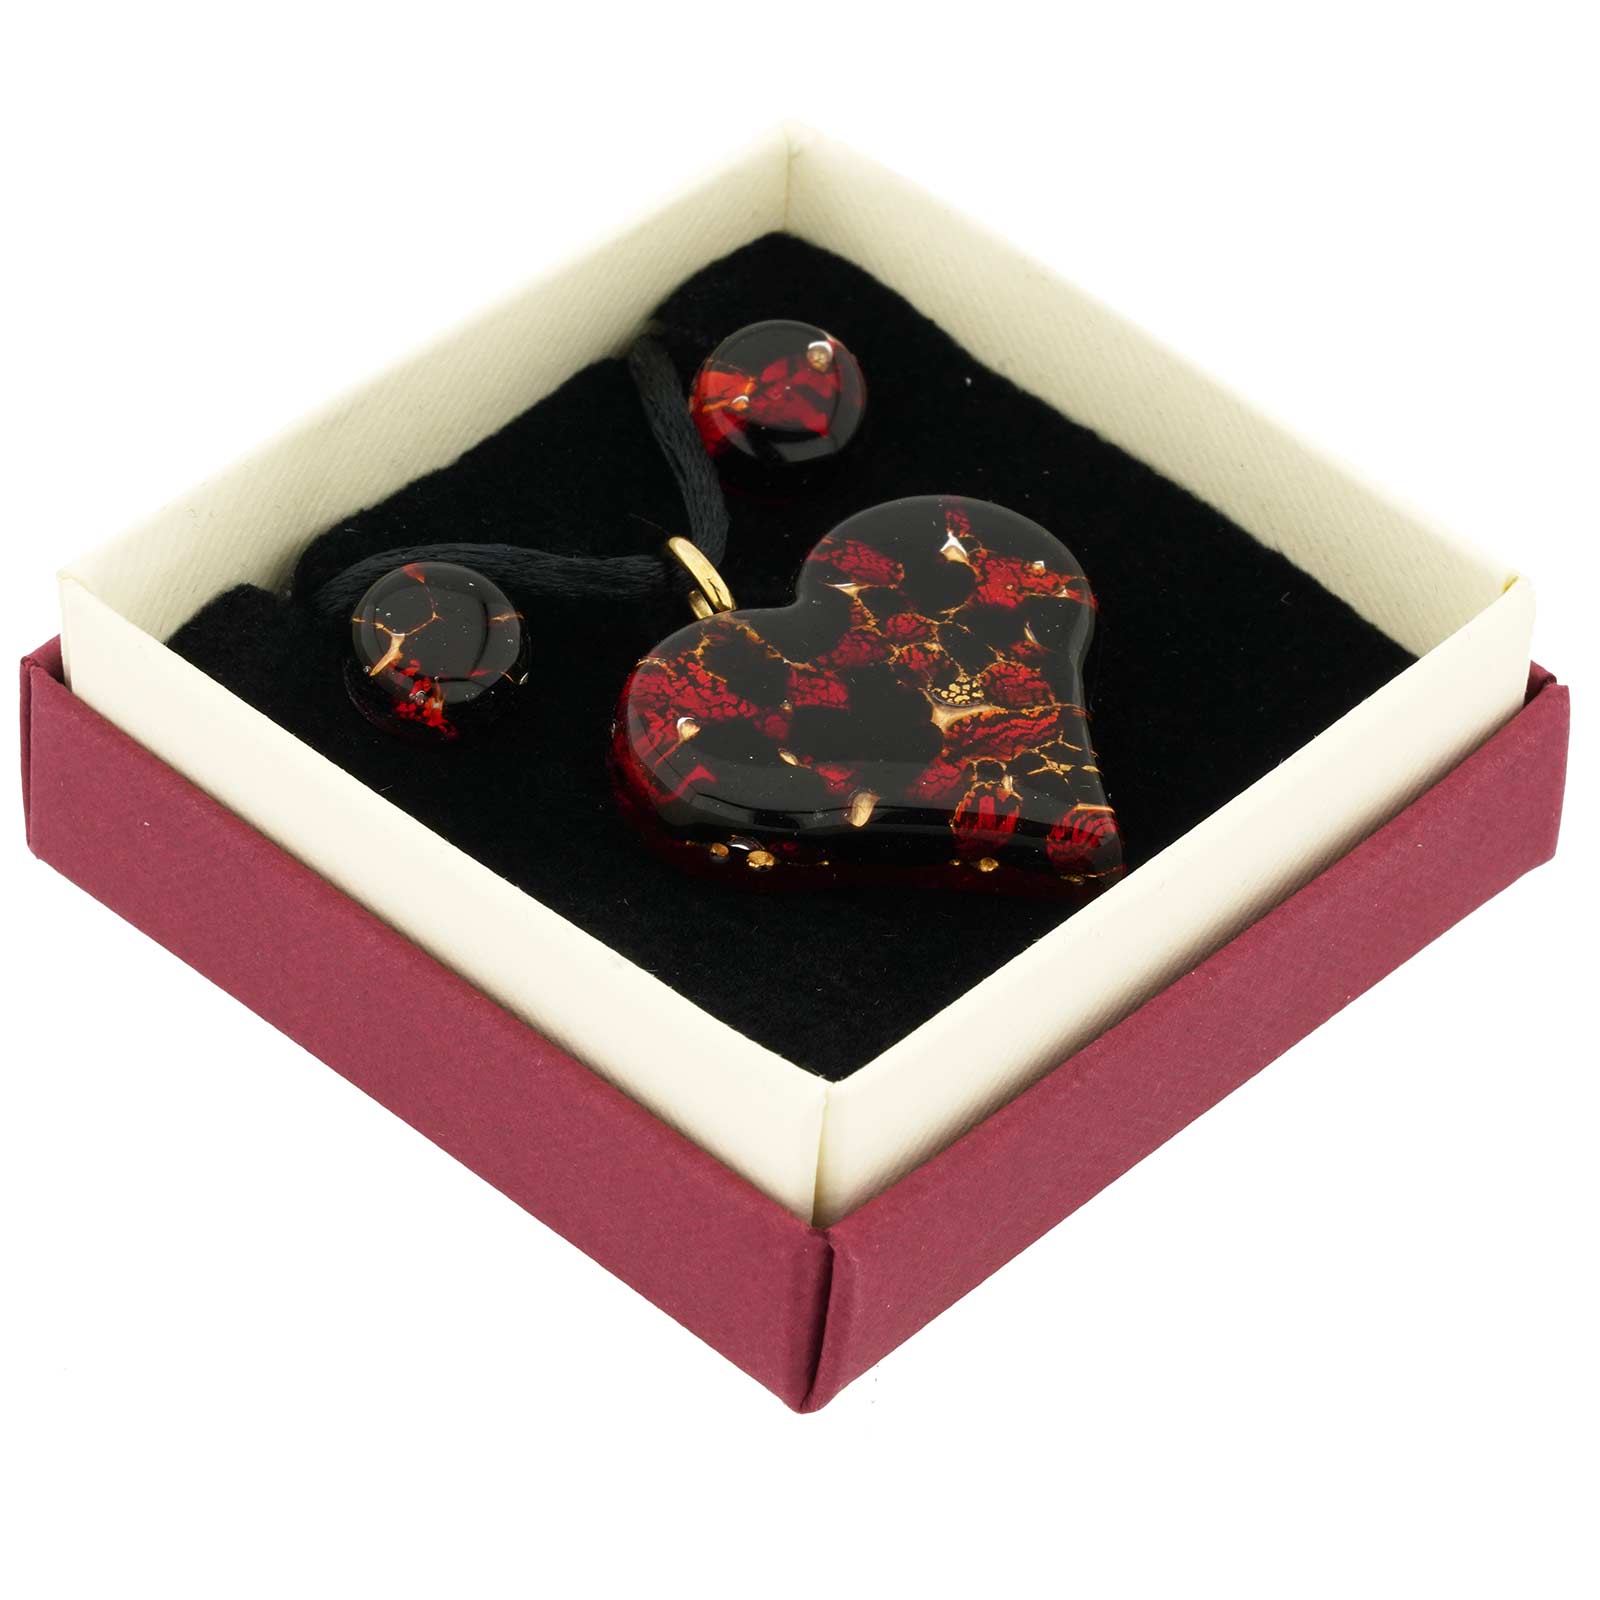 Venetian Reflections Heart Necklace and Earrings Set - Black Red